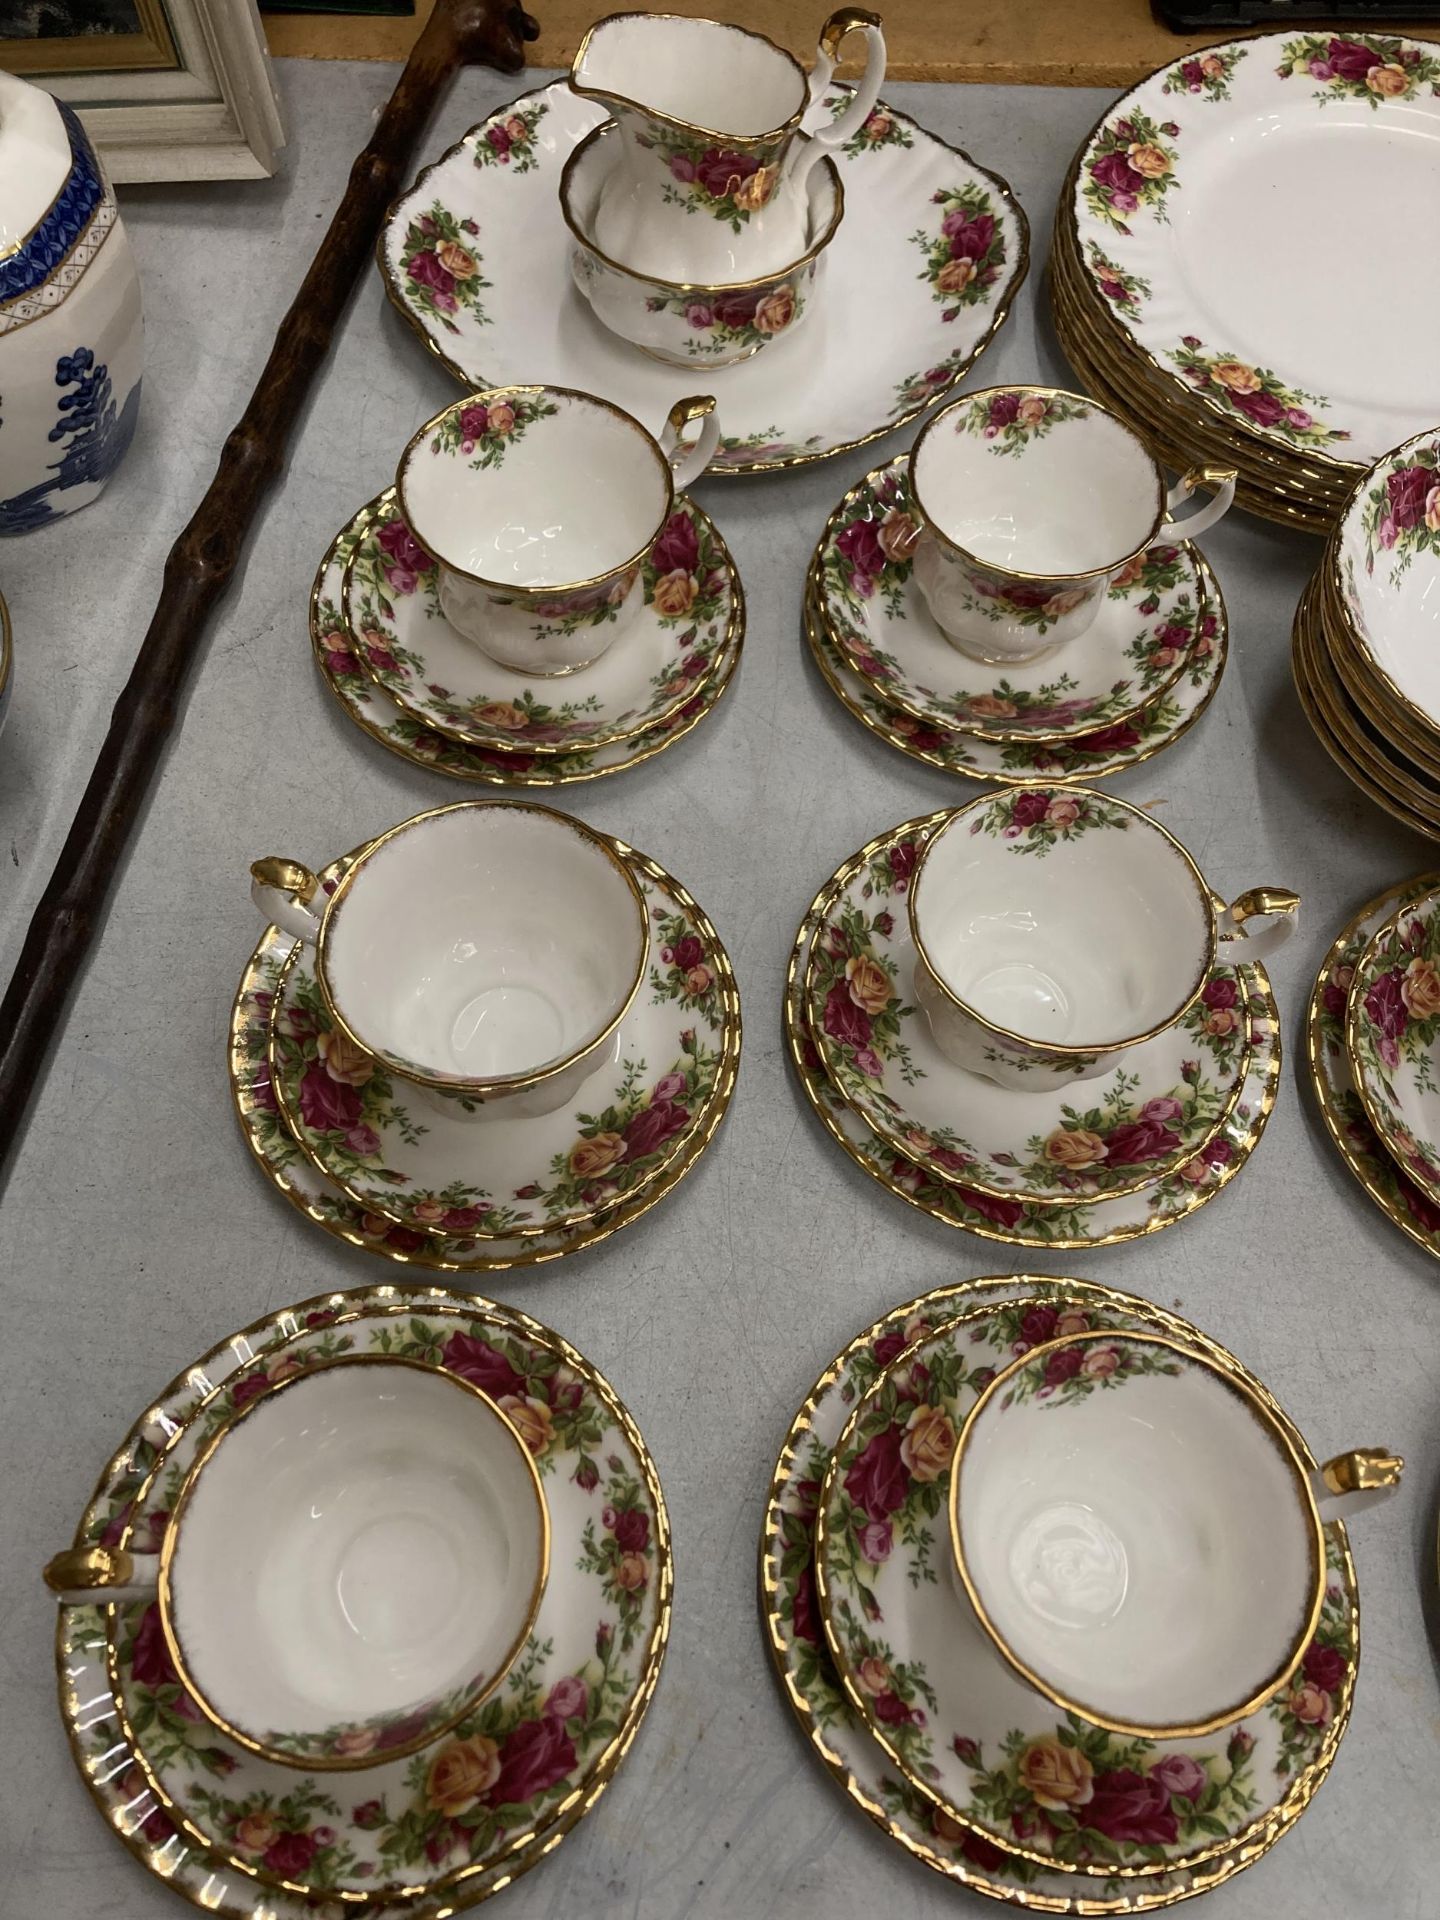 A FORTY FIVE PIECE ROYAL ALBERT OLD COUNTRY ROSES PATTERN TEA SET - Image 2 of 4